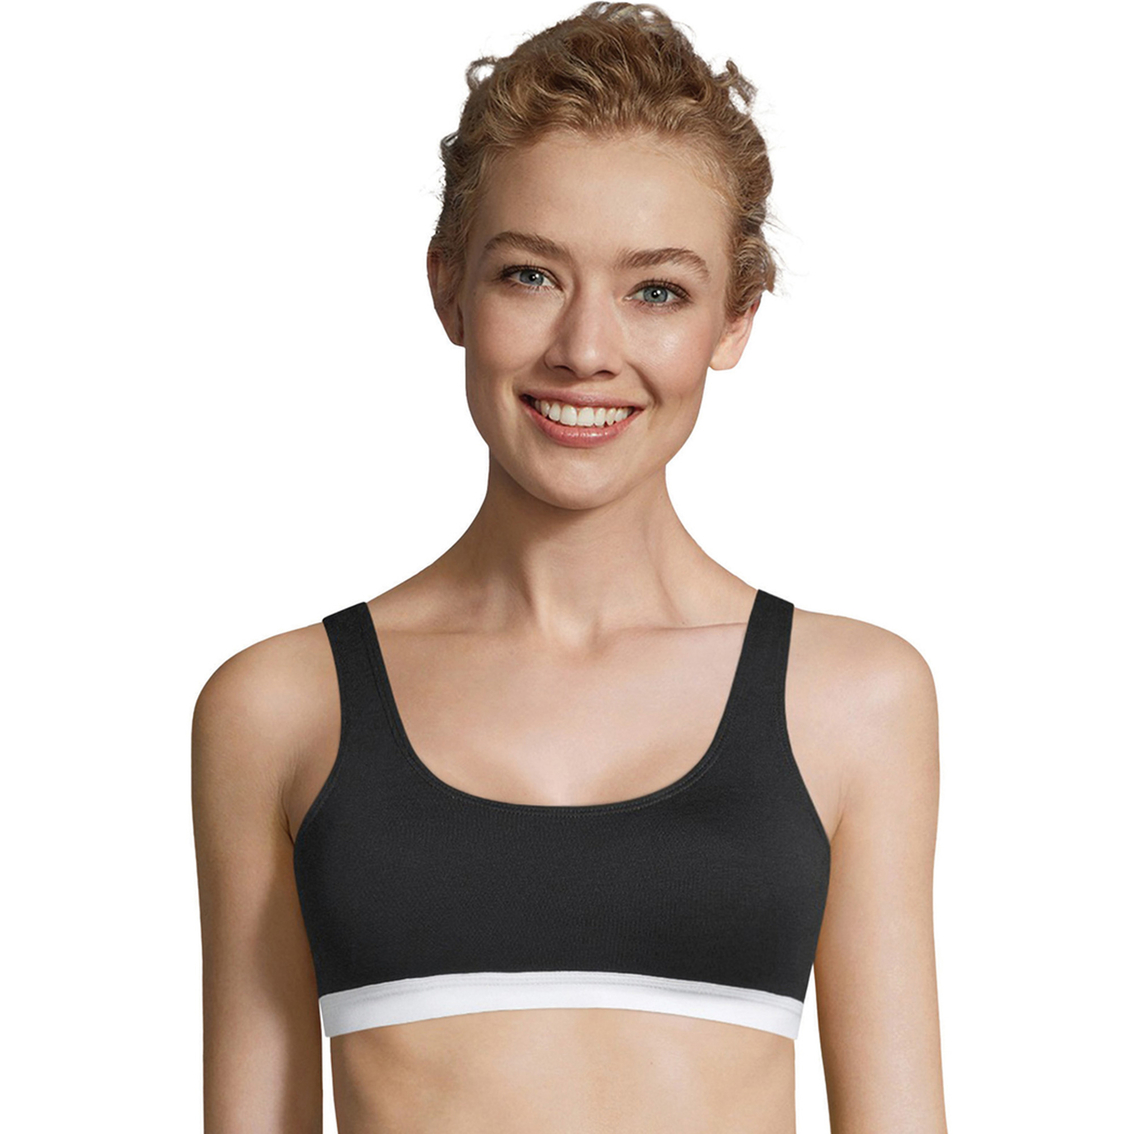 Hanes Comfy Cotton Stretch Unlined Wirefree Bra, 2 Pk.